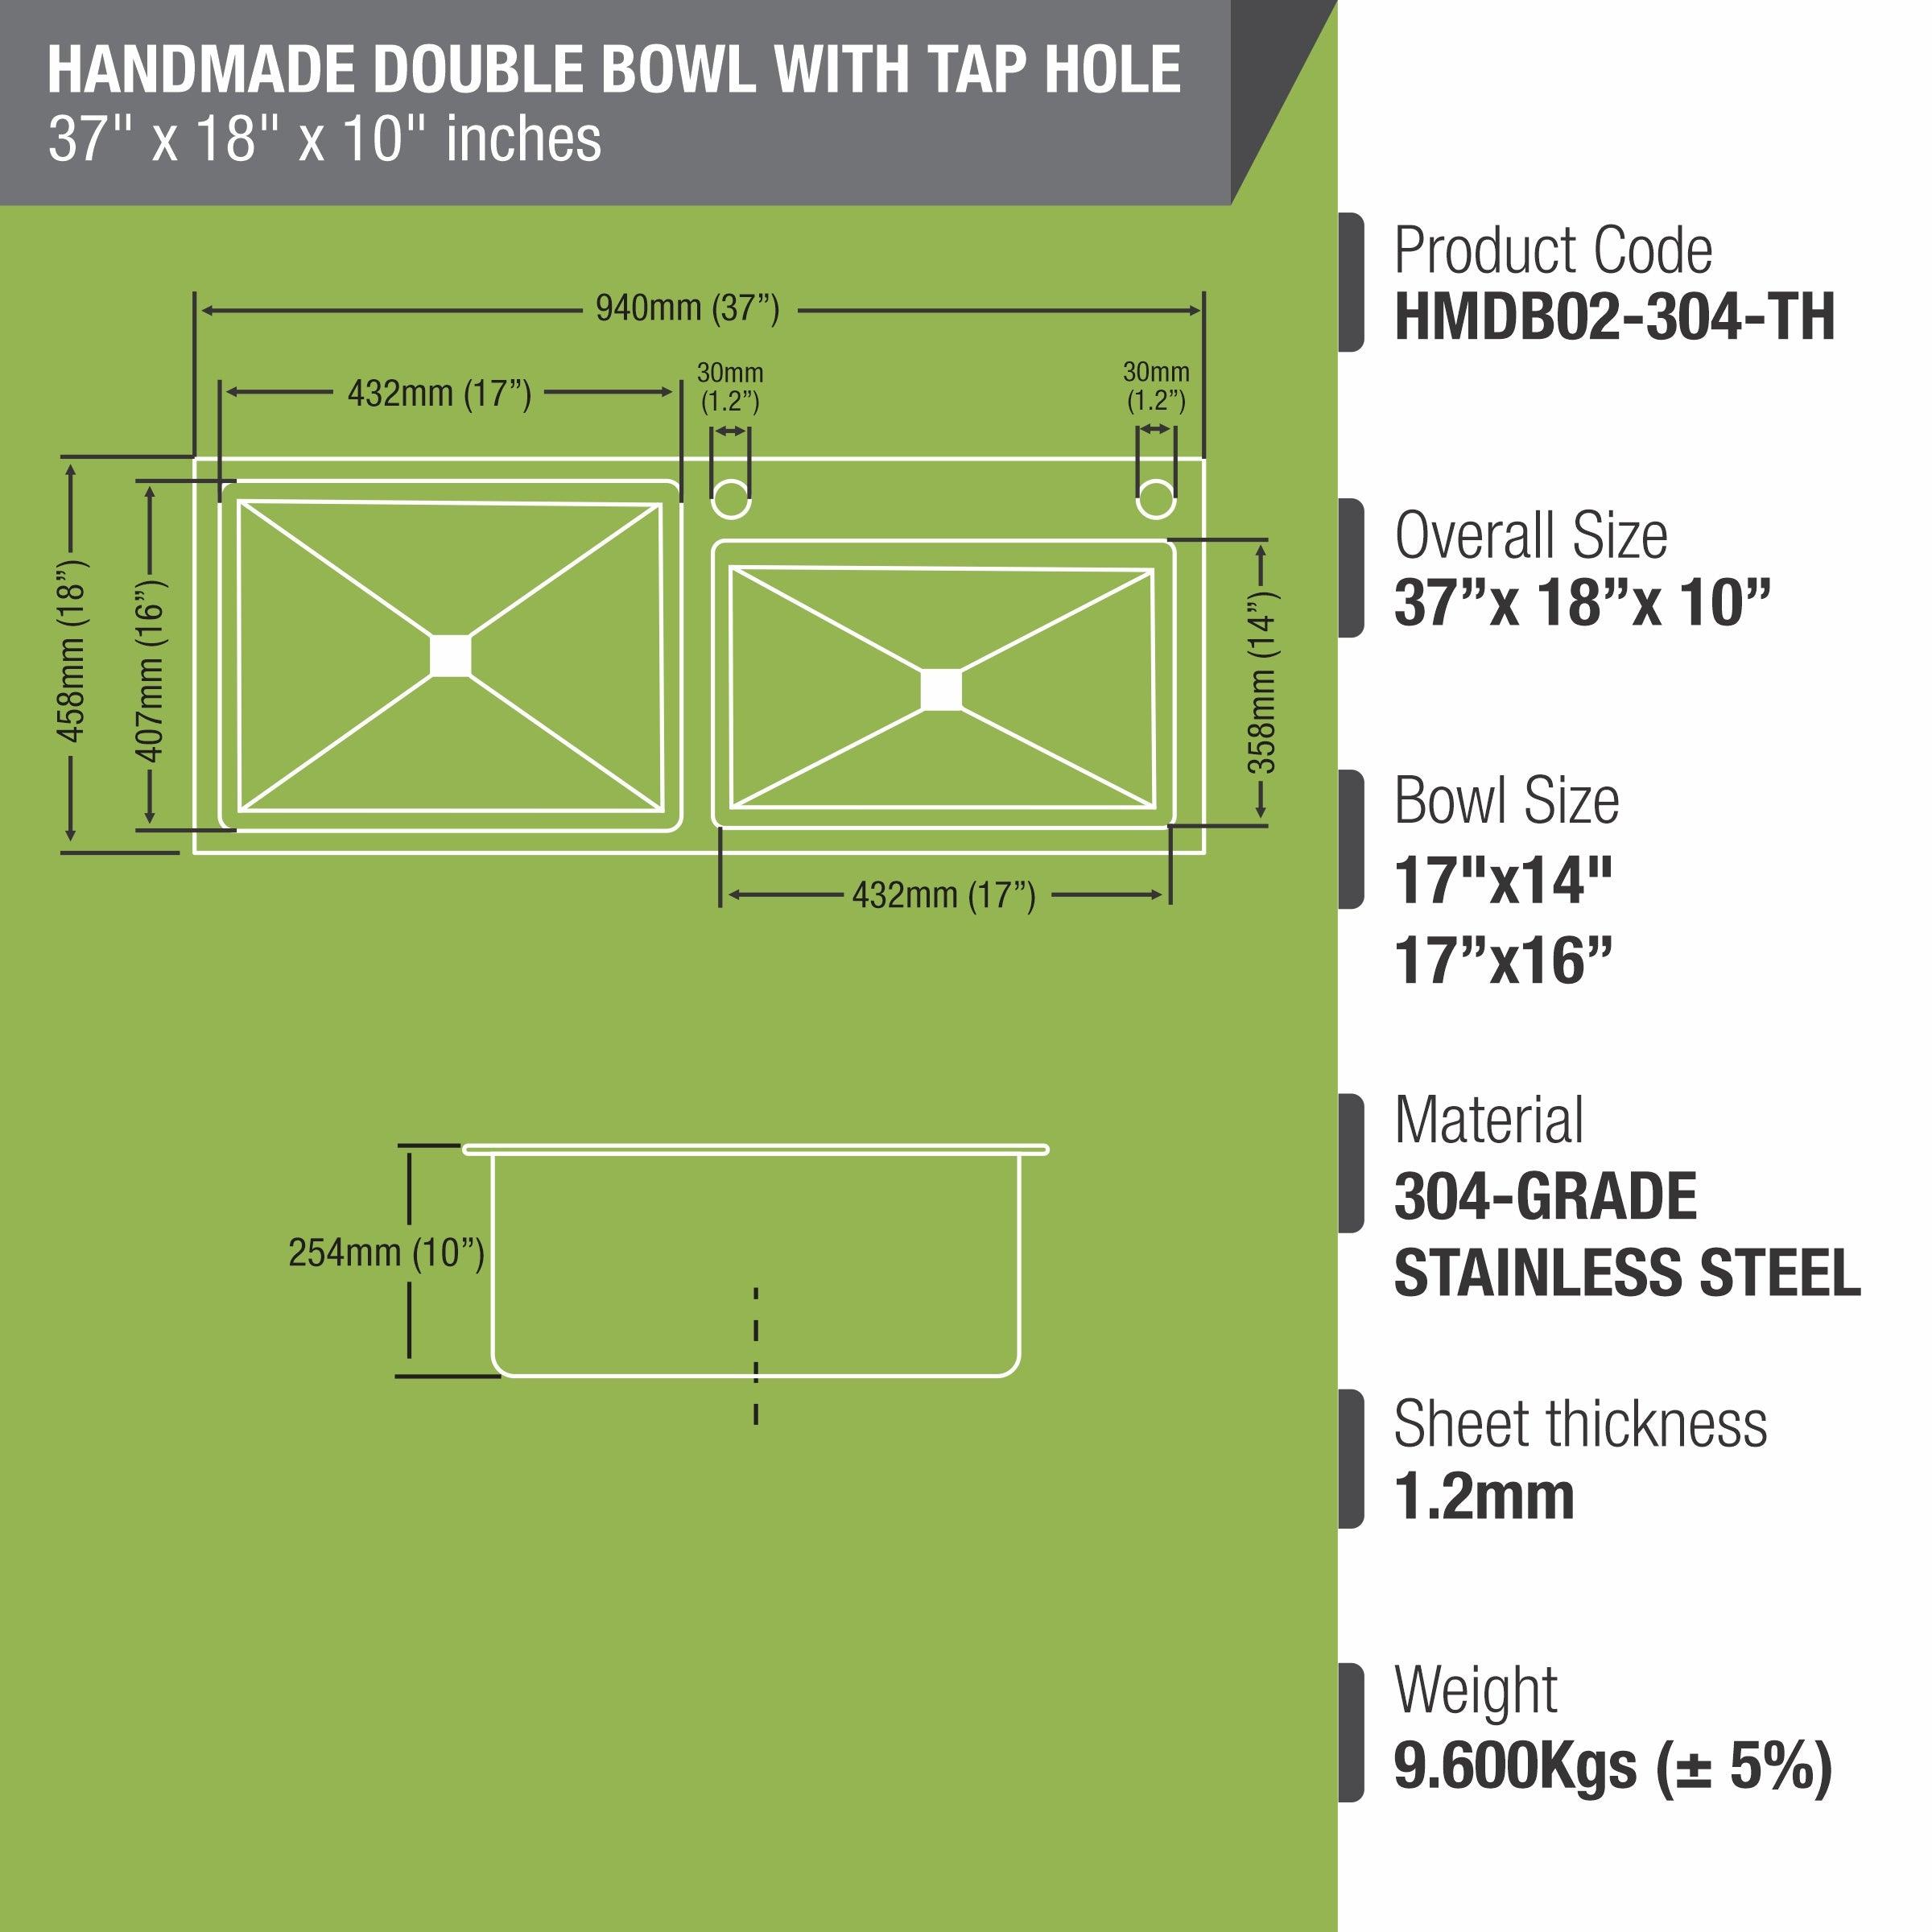 Handmade Double Bowl 304-Grade Kitchen Sink with Tap Hole (37 x 18 x 10 Inches) sizes and dimensions